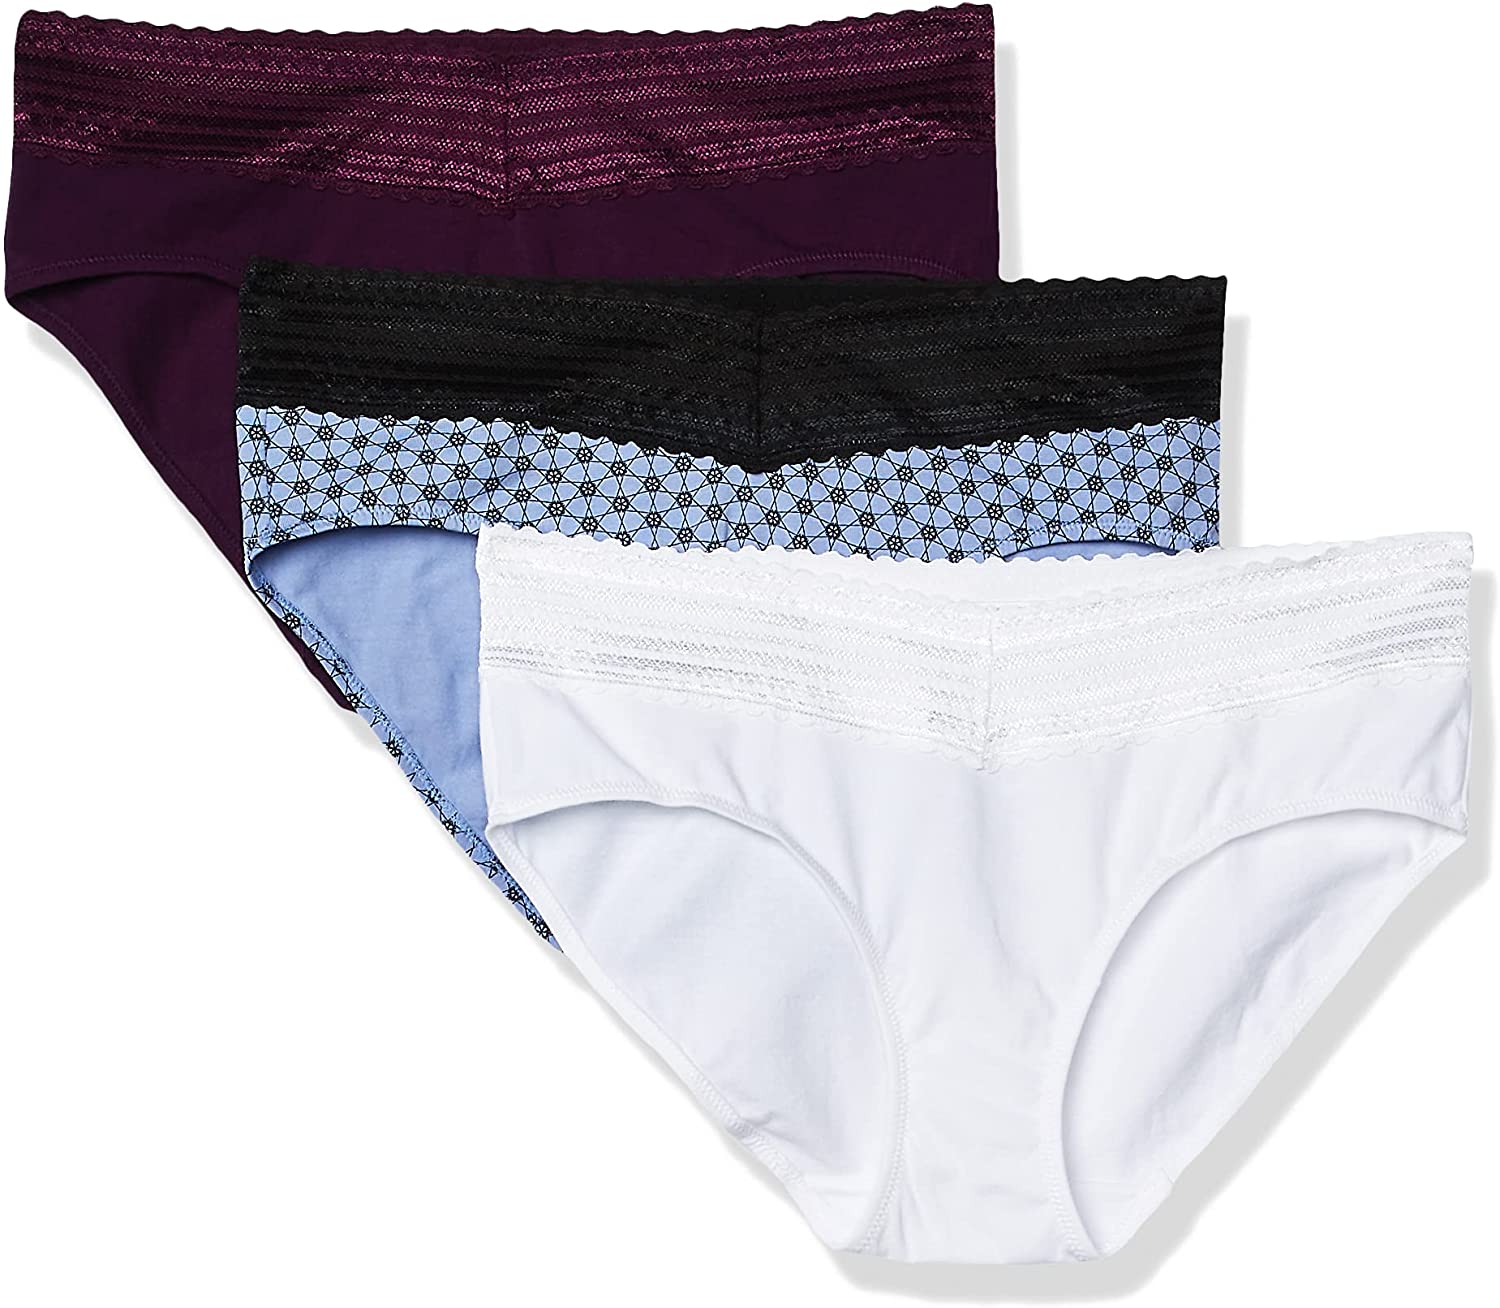 Blissful benefits by warner's no muffin top brief panties 3pk